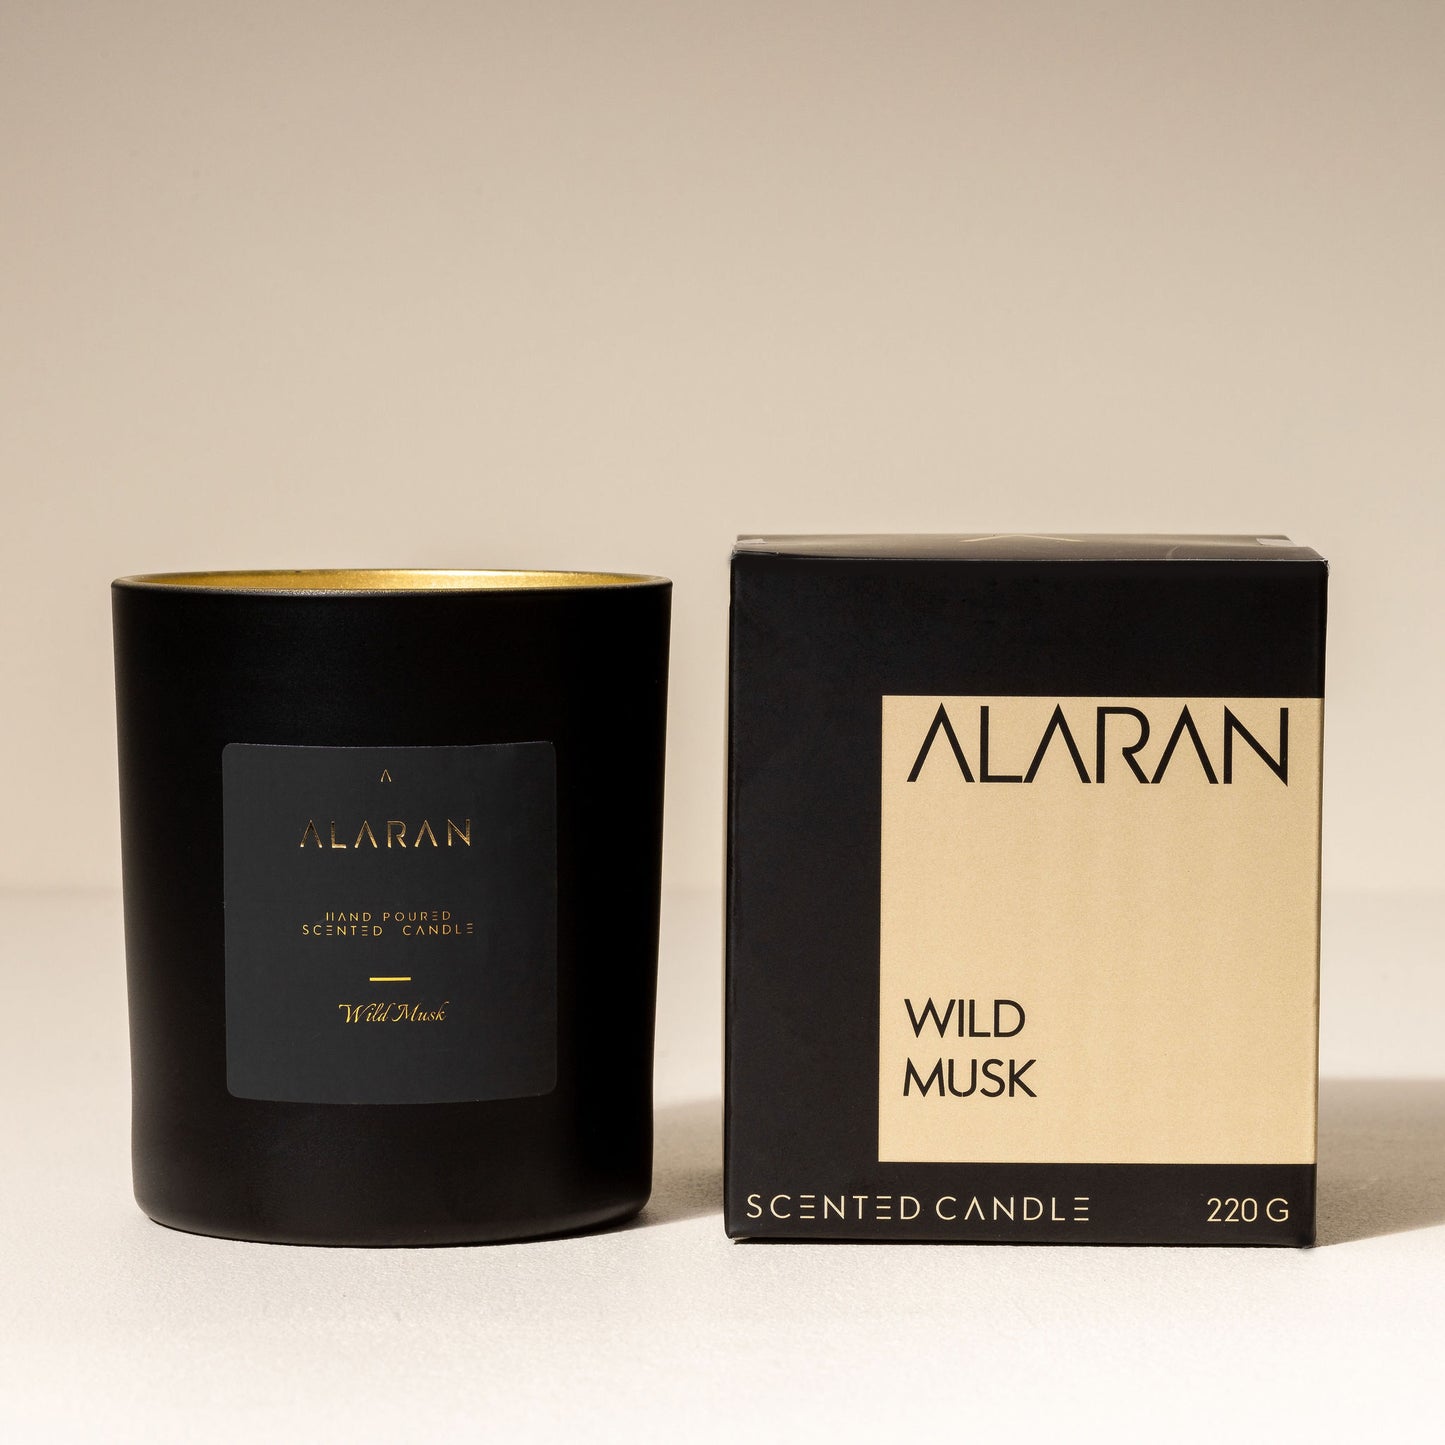 Wild Musk candle with packaging on a neutral background